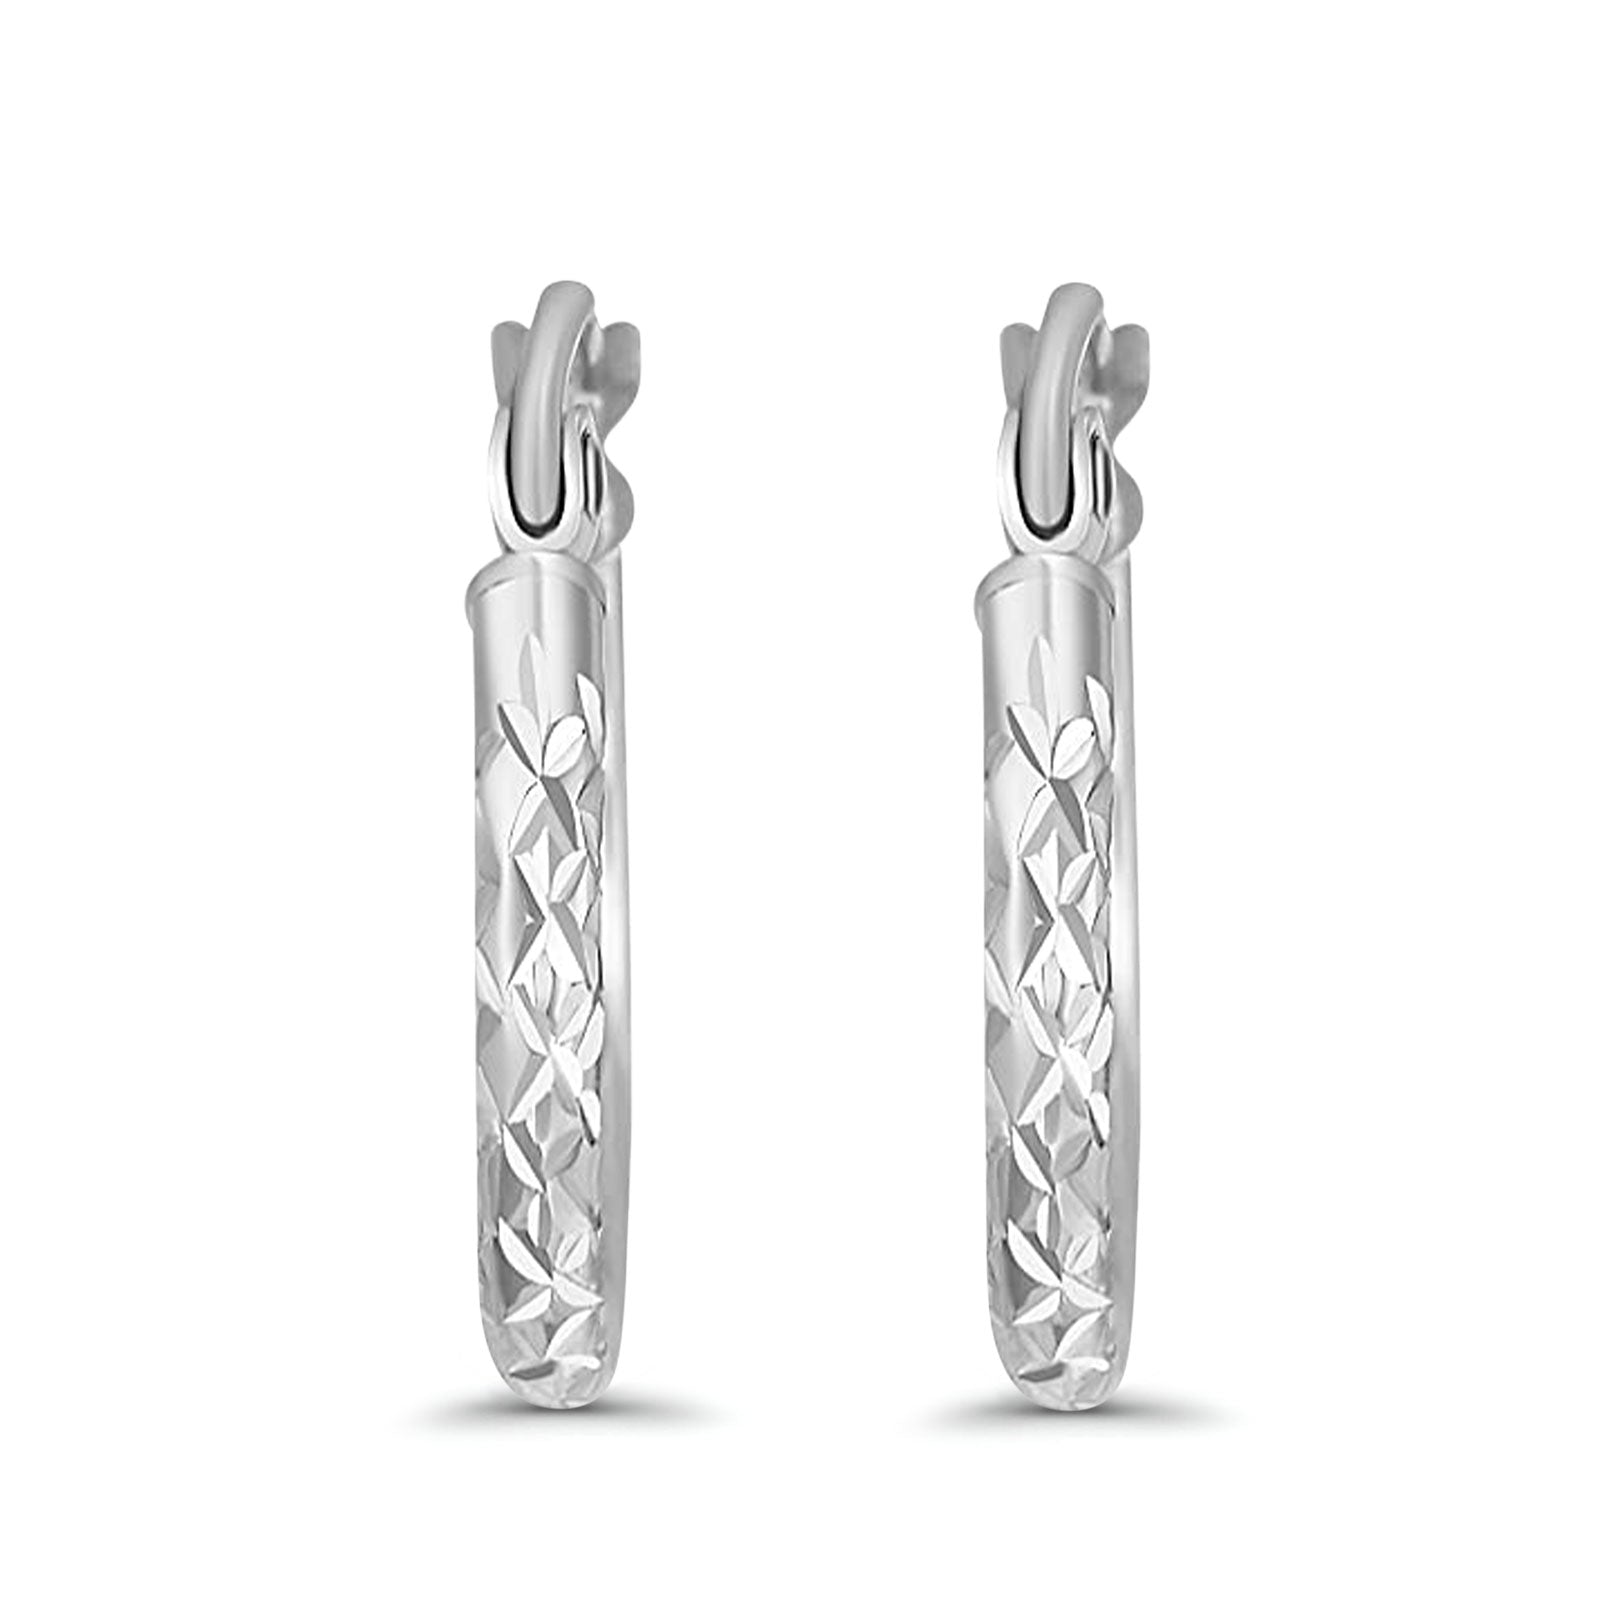 14K White Gold 1.5mm Thickness Hoop Huggie Earrings - 4 Different Size Available Best Anniversary Birthday Gift for Her